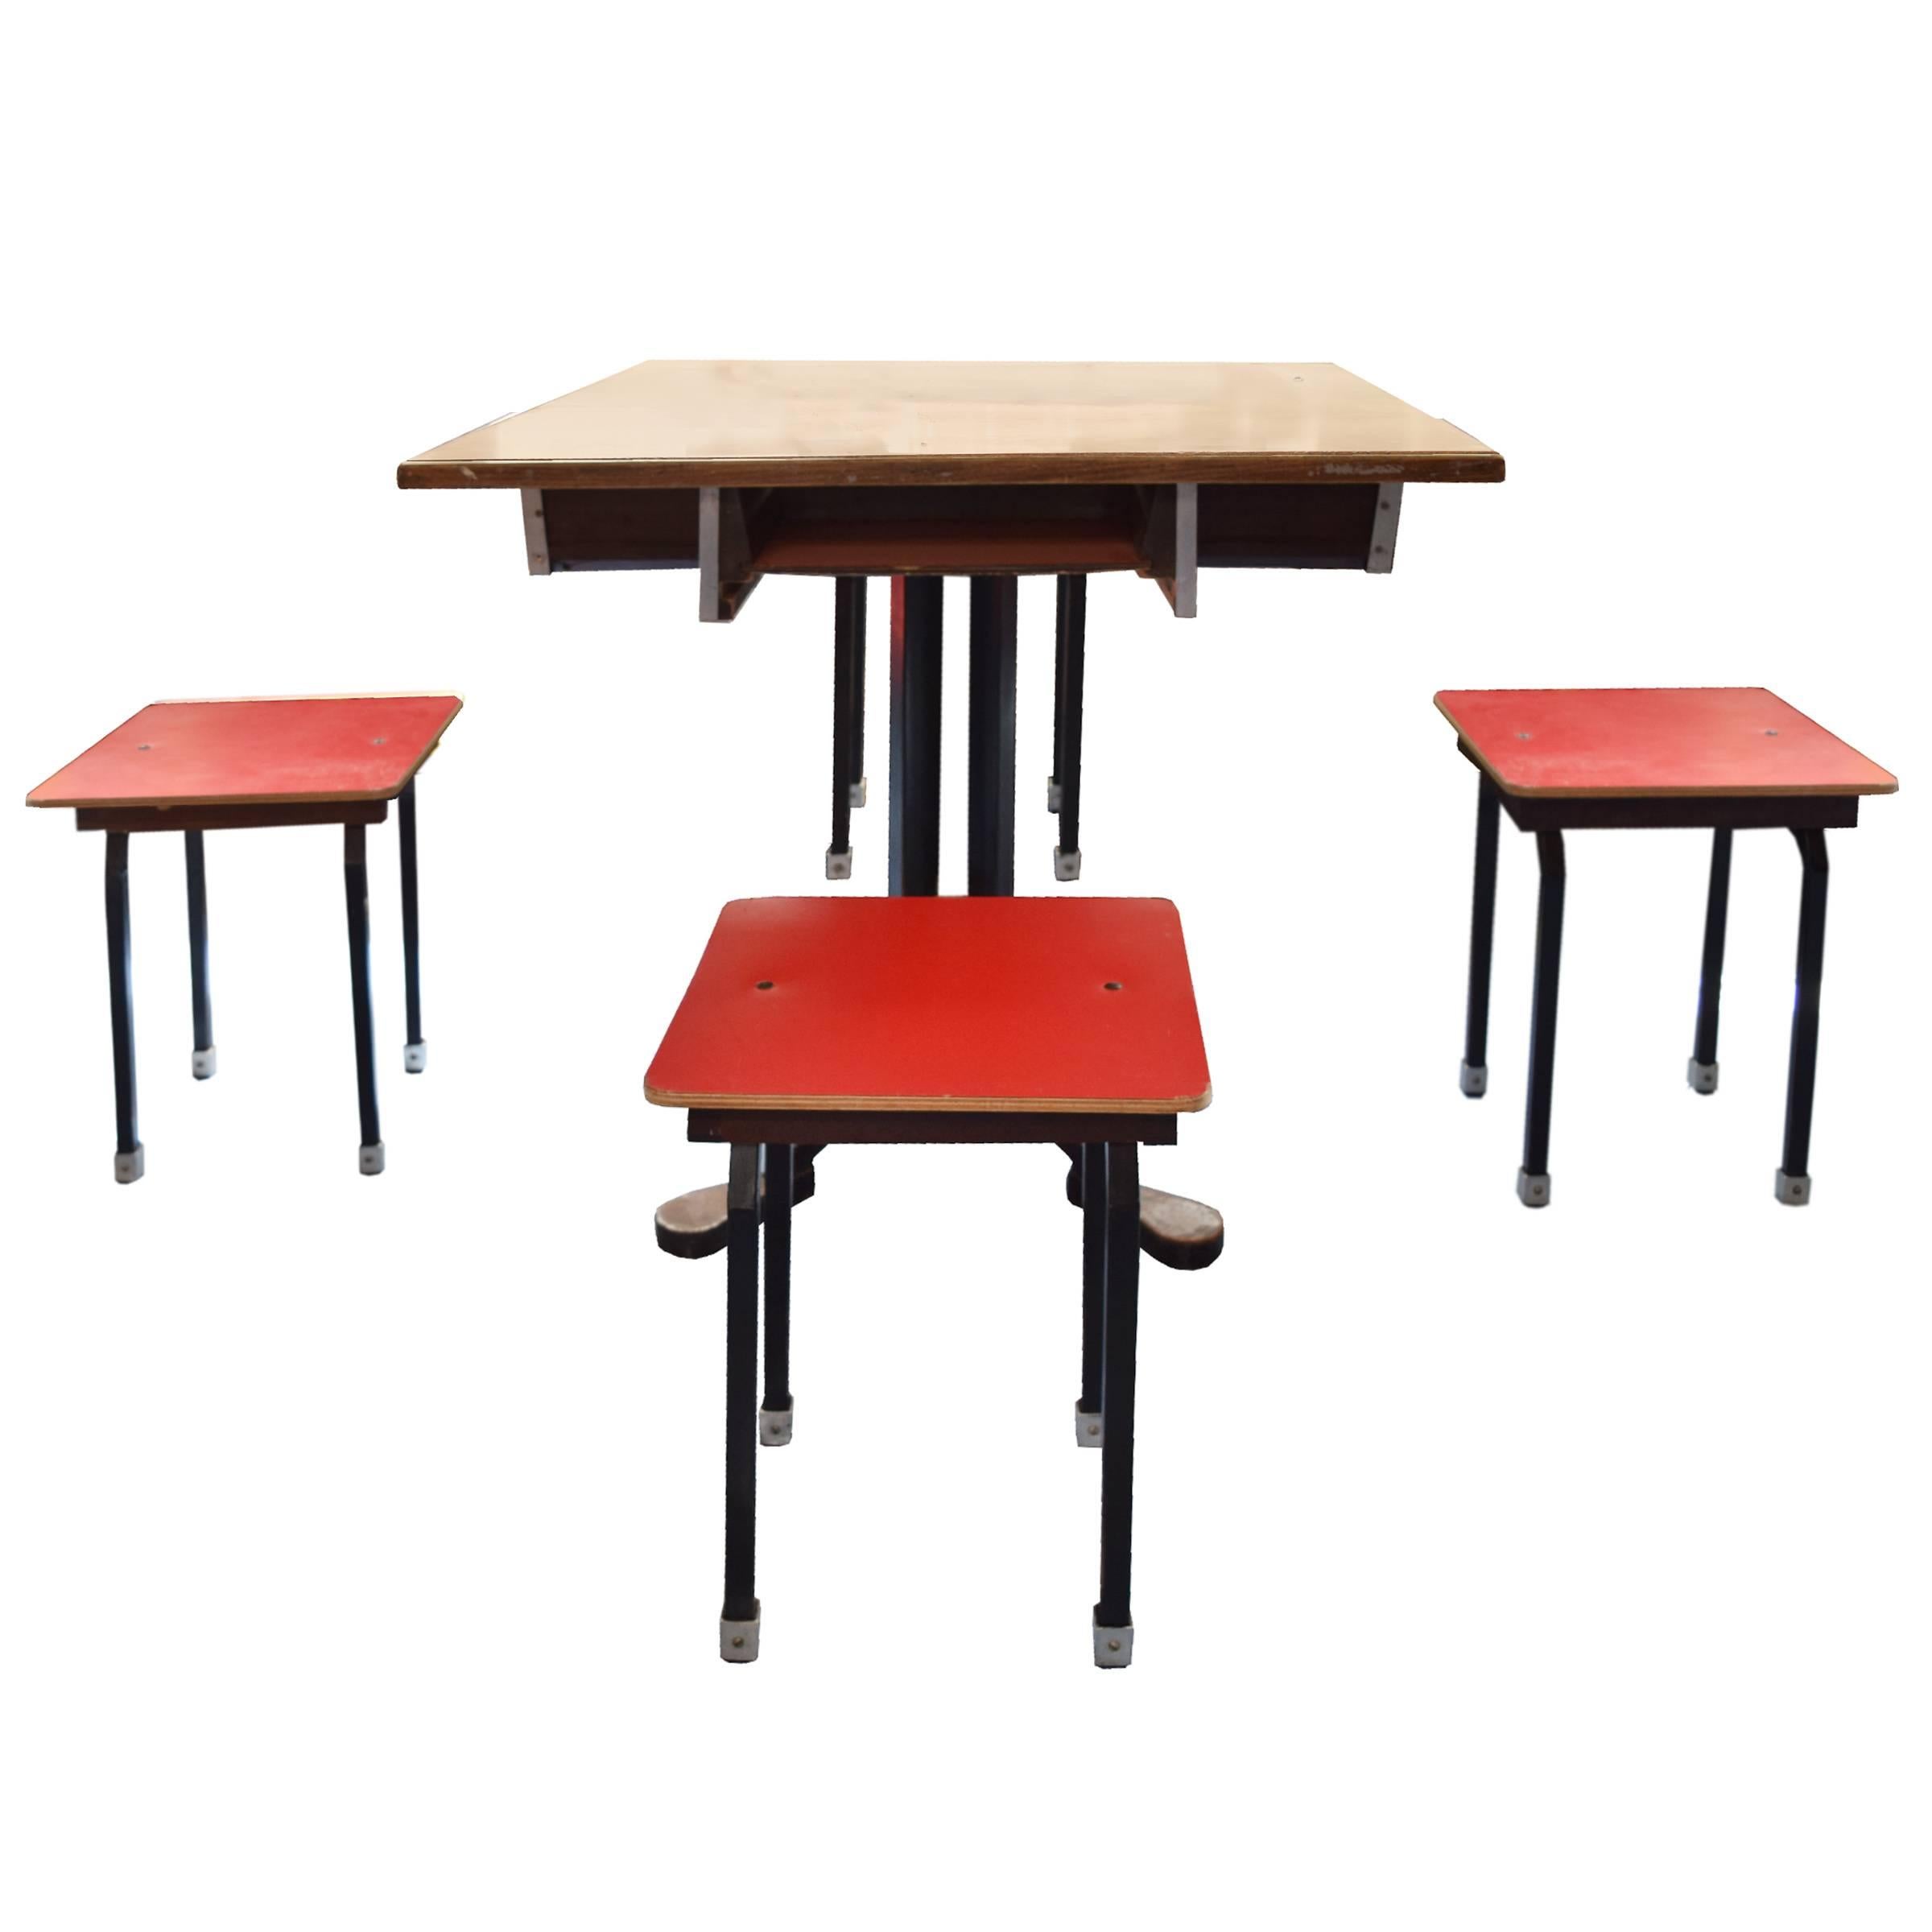 A great German cafe table with four stools that neatly slide in the tabletop for storage, circa 1960.